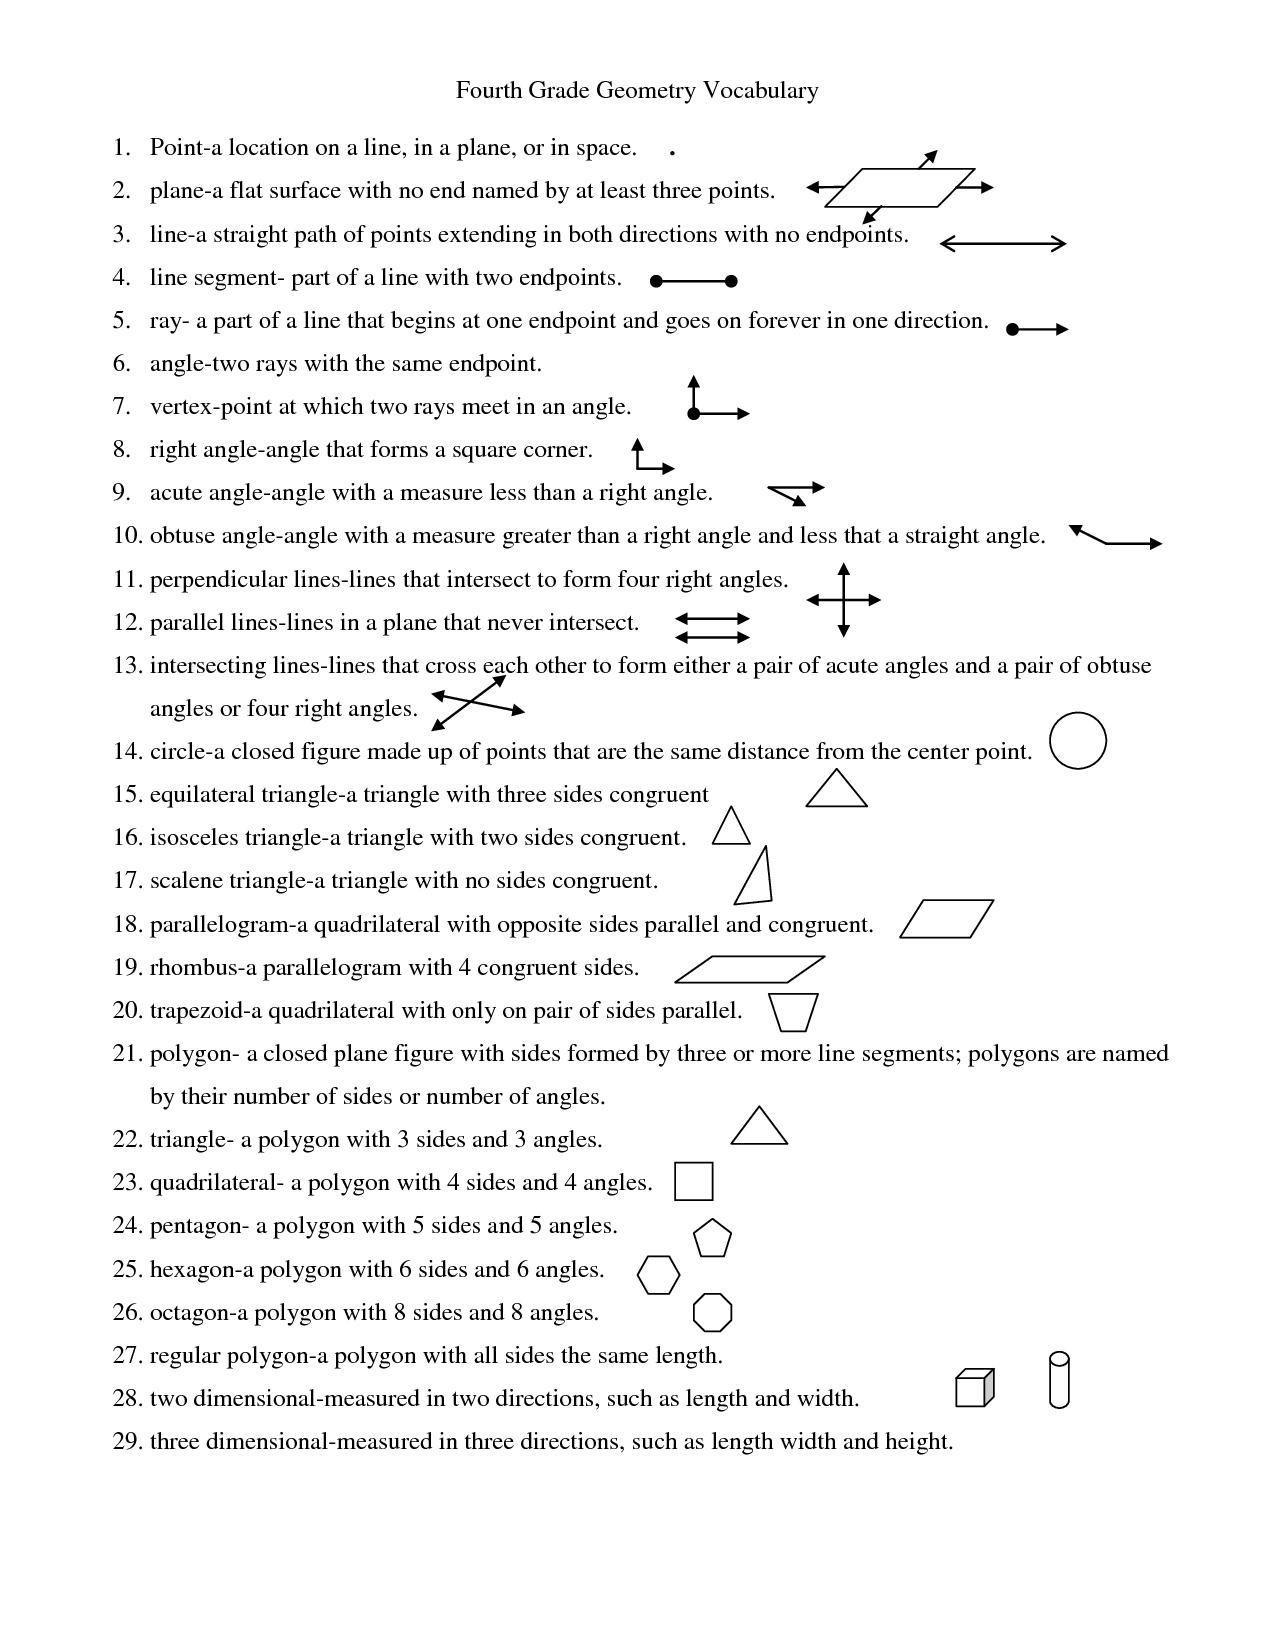 9 Best Images of Math Vocabulary Matching Worksheet ...